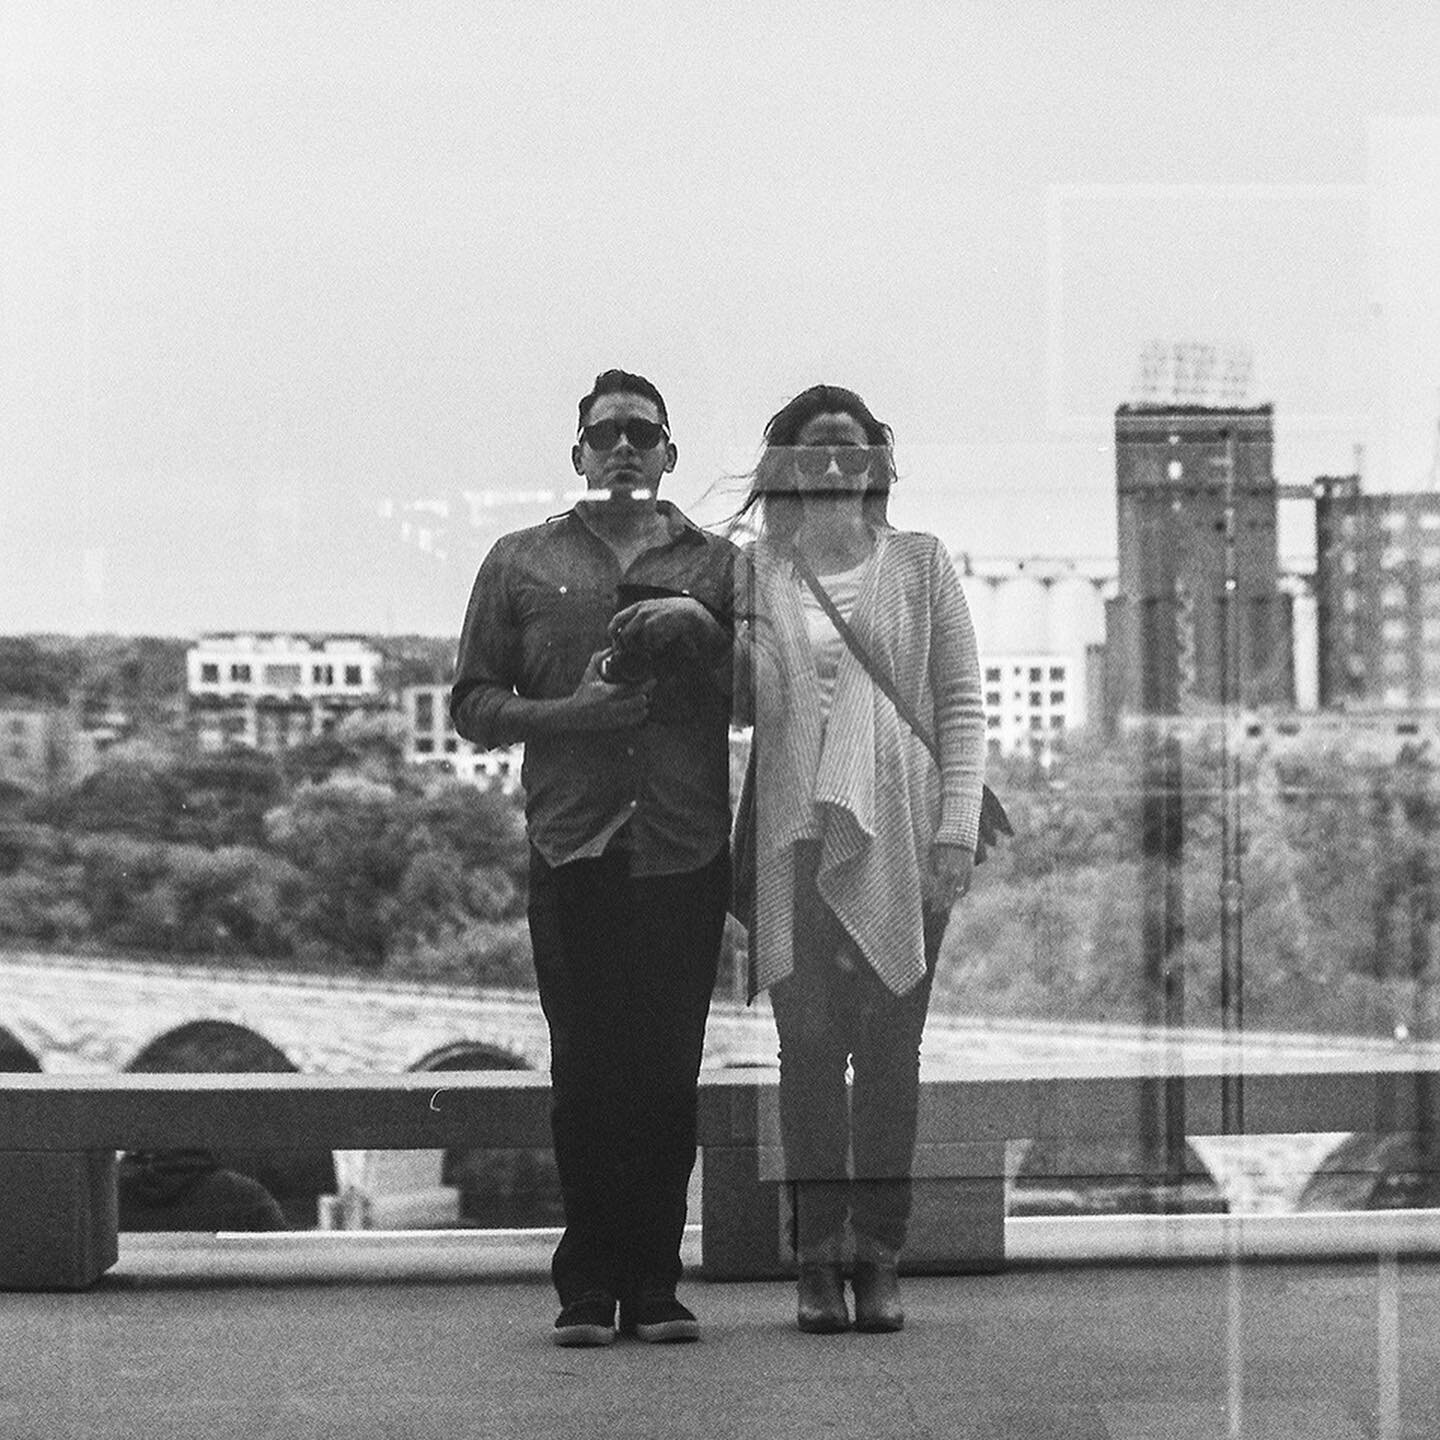 A decade of birthdays with this guy I&rsquo;m honored to call my husband 🥳 it feels like yesterday we took this at the Guthrie on the first of your birthdays we celebrated together. Now we&rsquo;re deep in the early years of parenthood and I can say